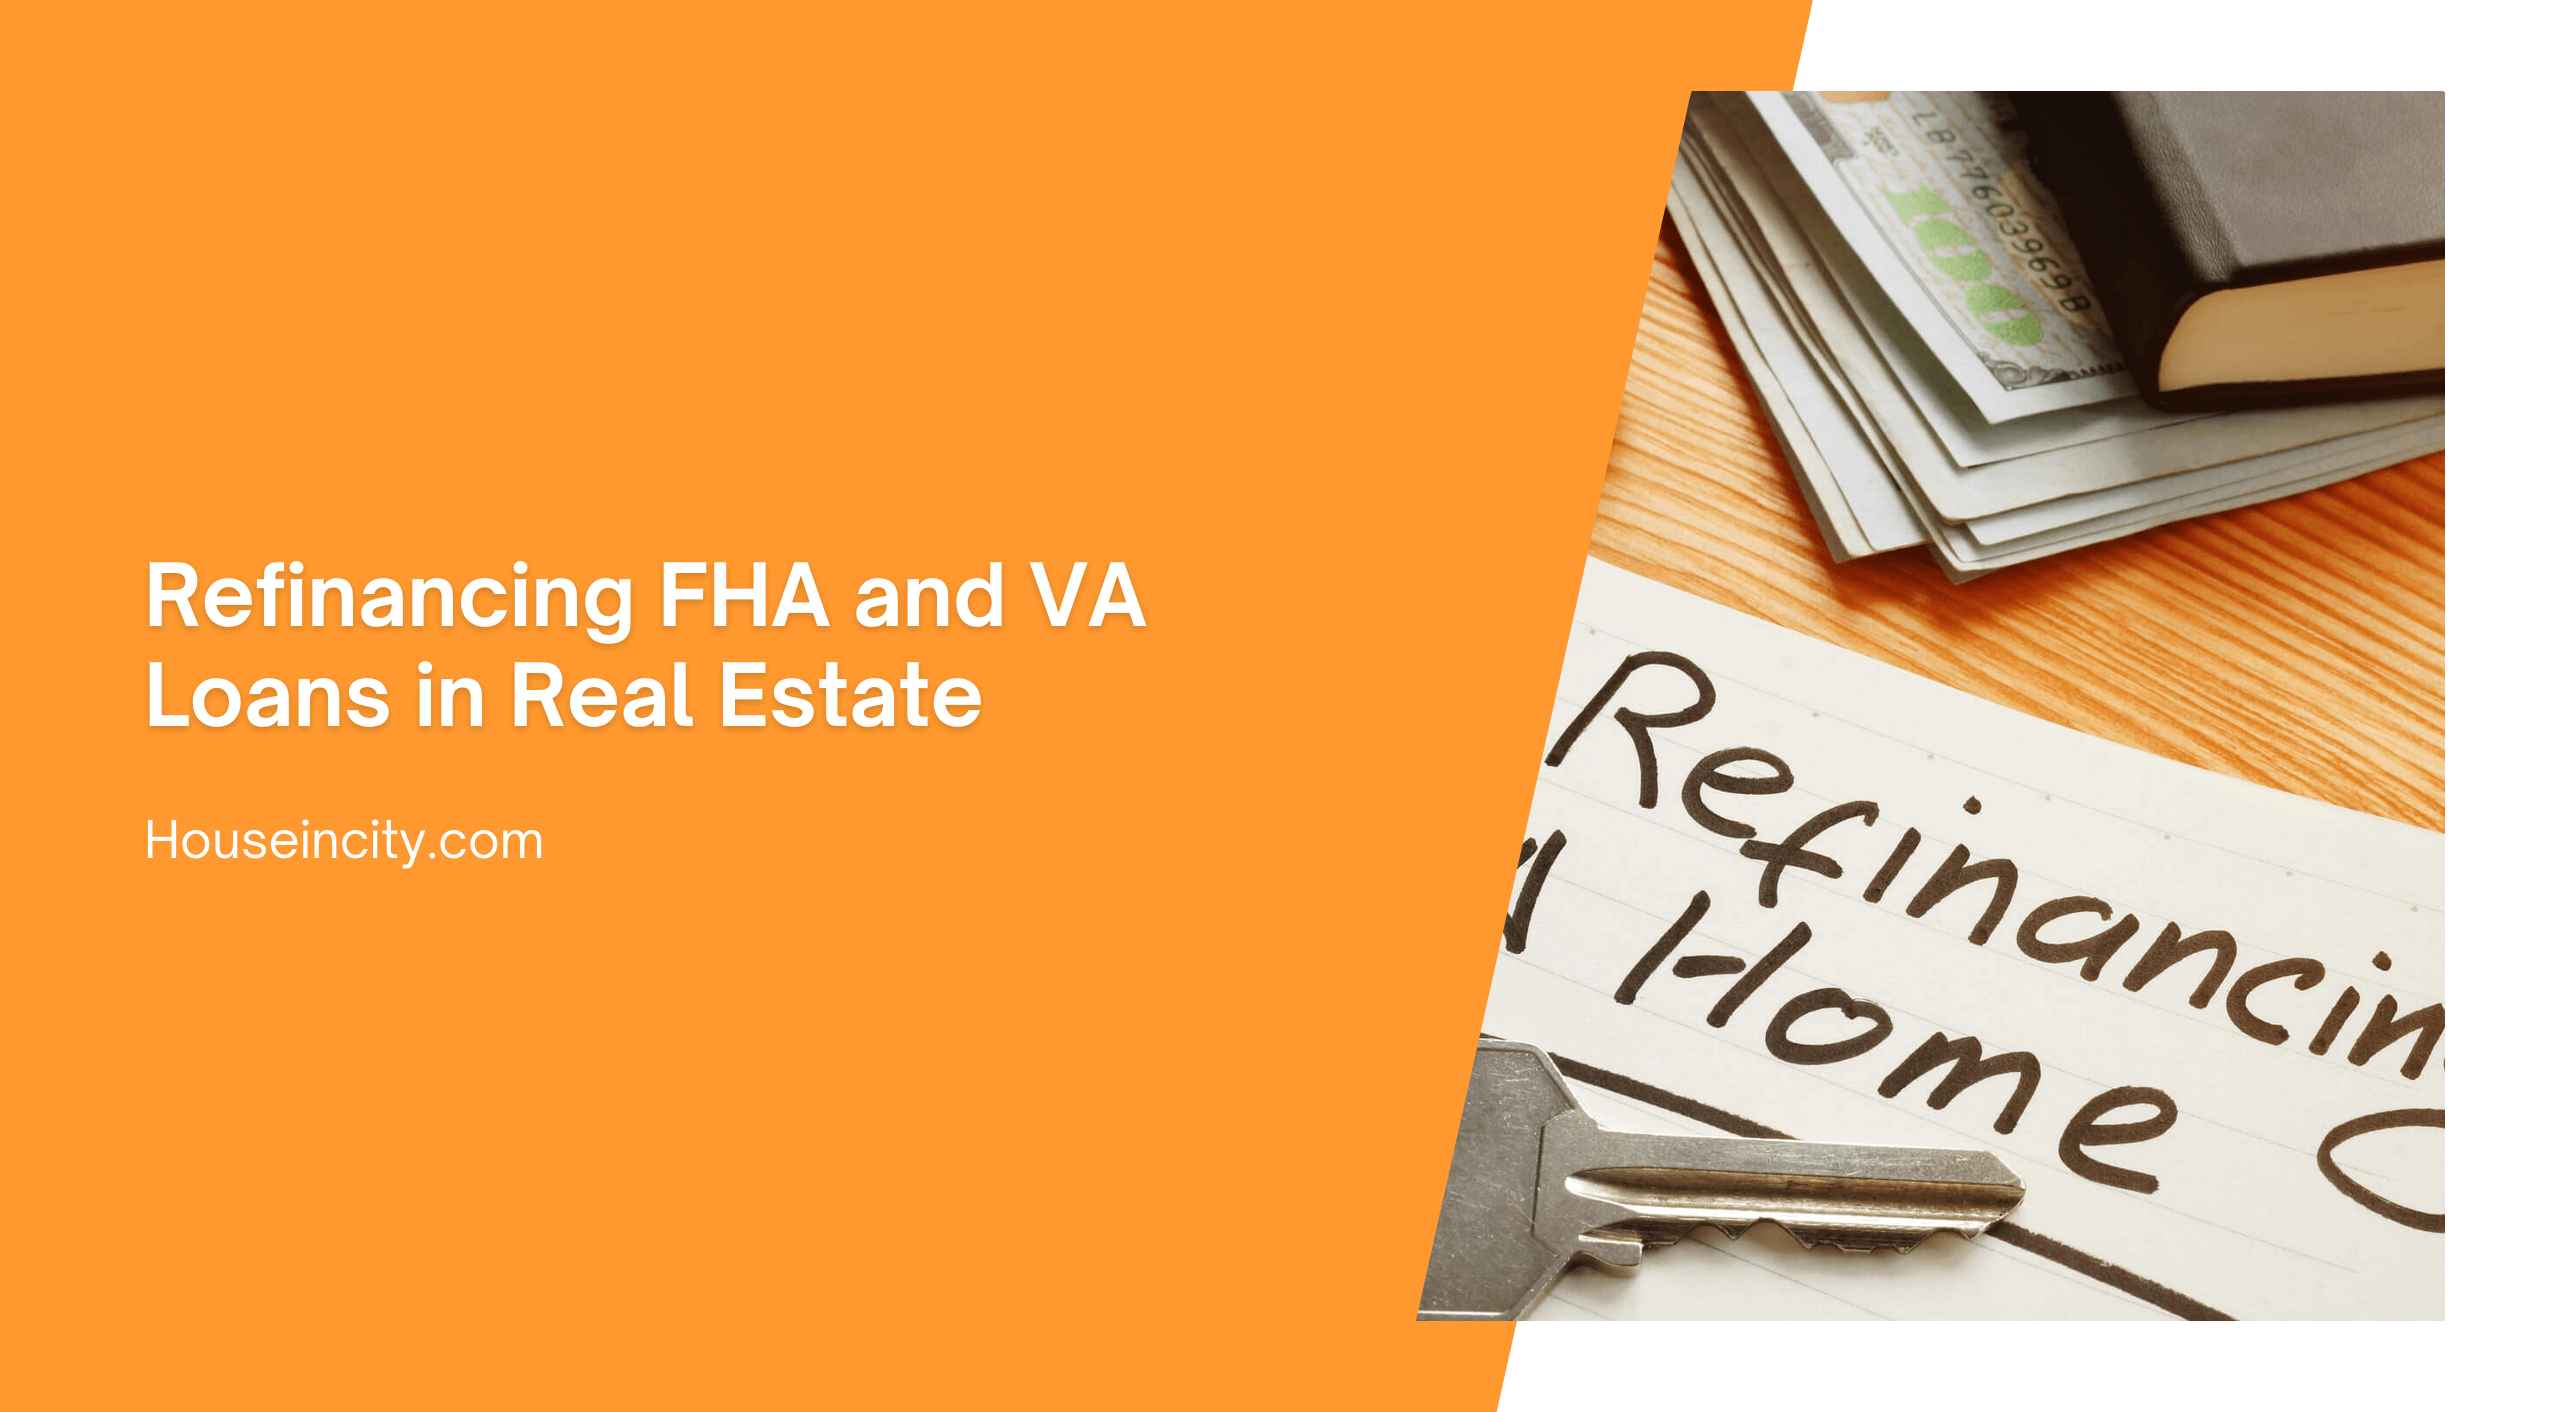 Refinancing FHA and VA Loans in Real Estate